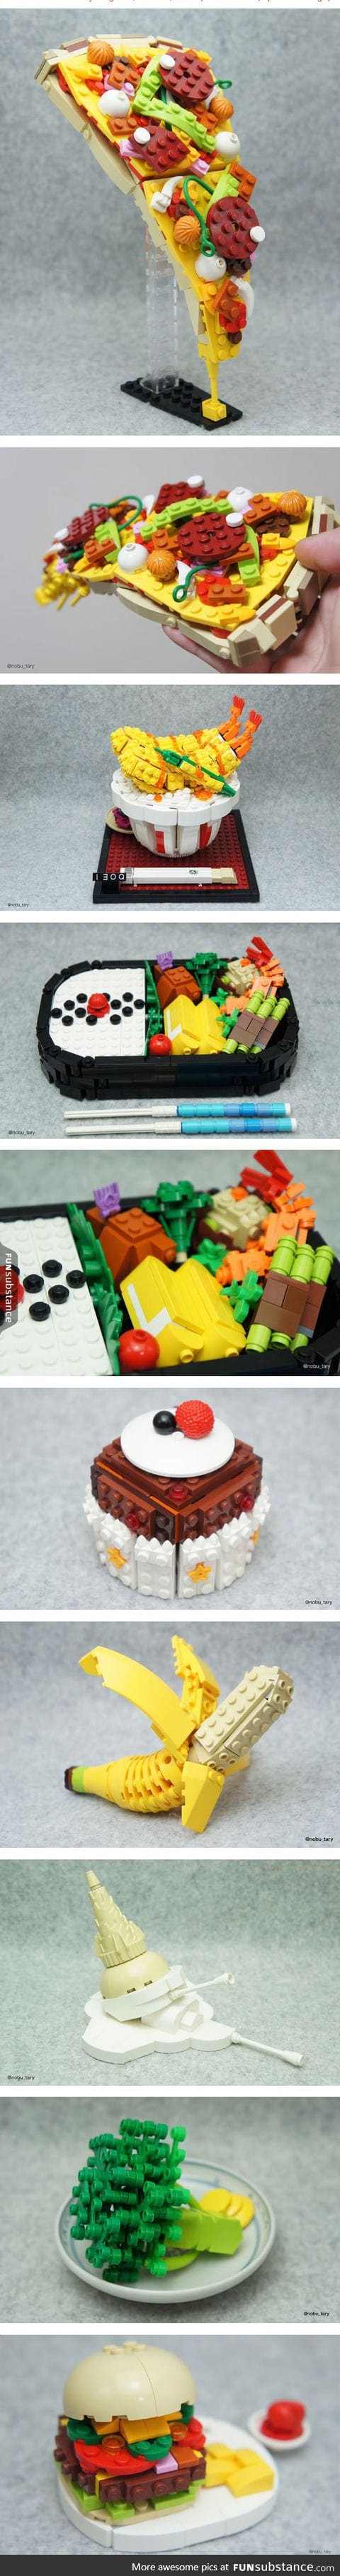 Legos Never Looked So Delicious With These Lego Art Pieces